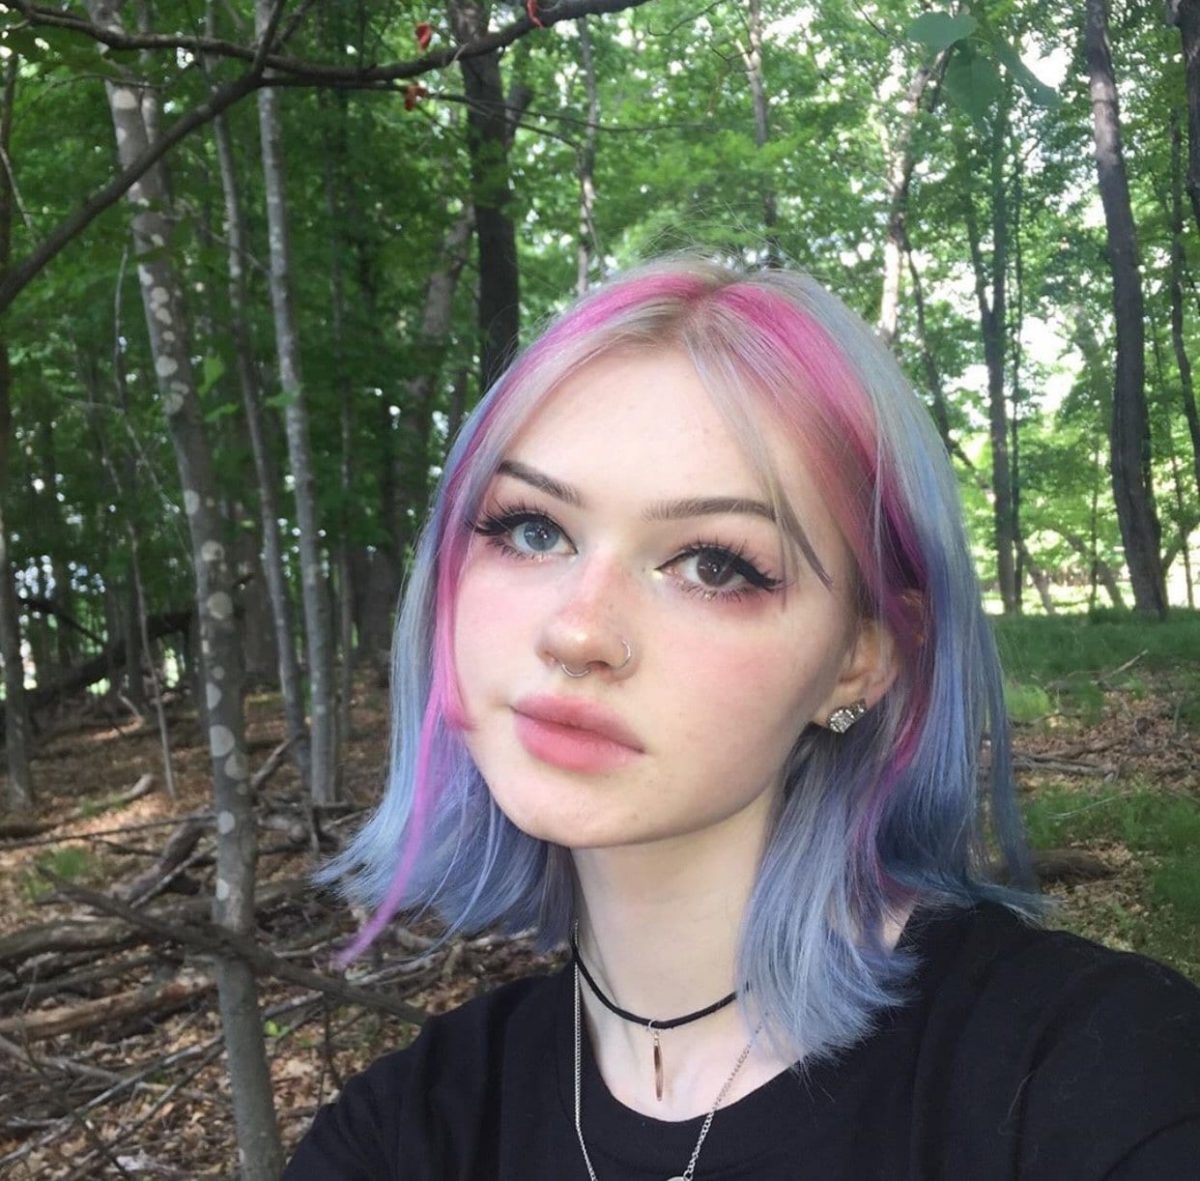 15 New Hair Color Trends for Teen Girls to Try in 2022